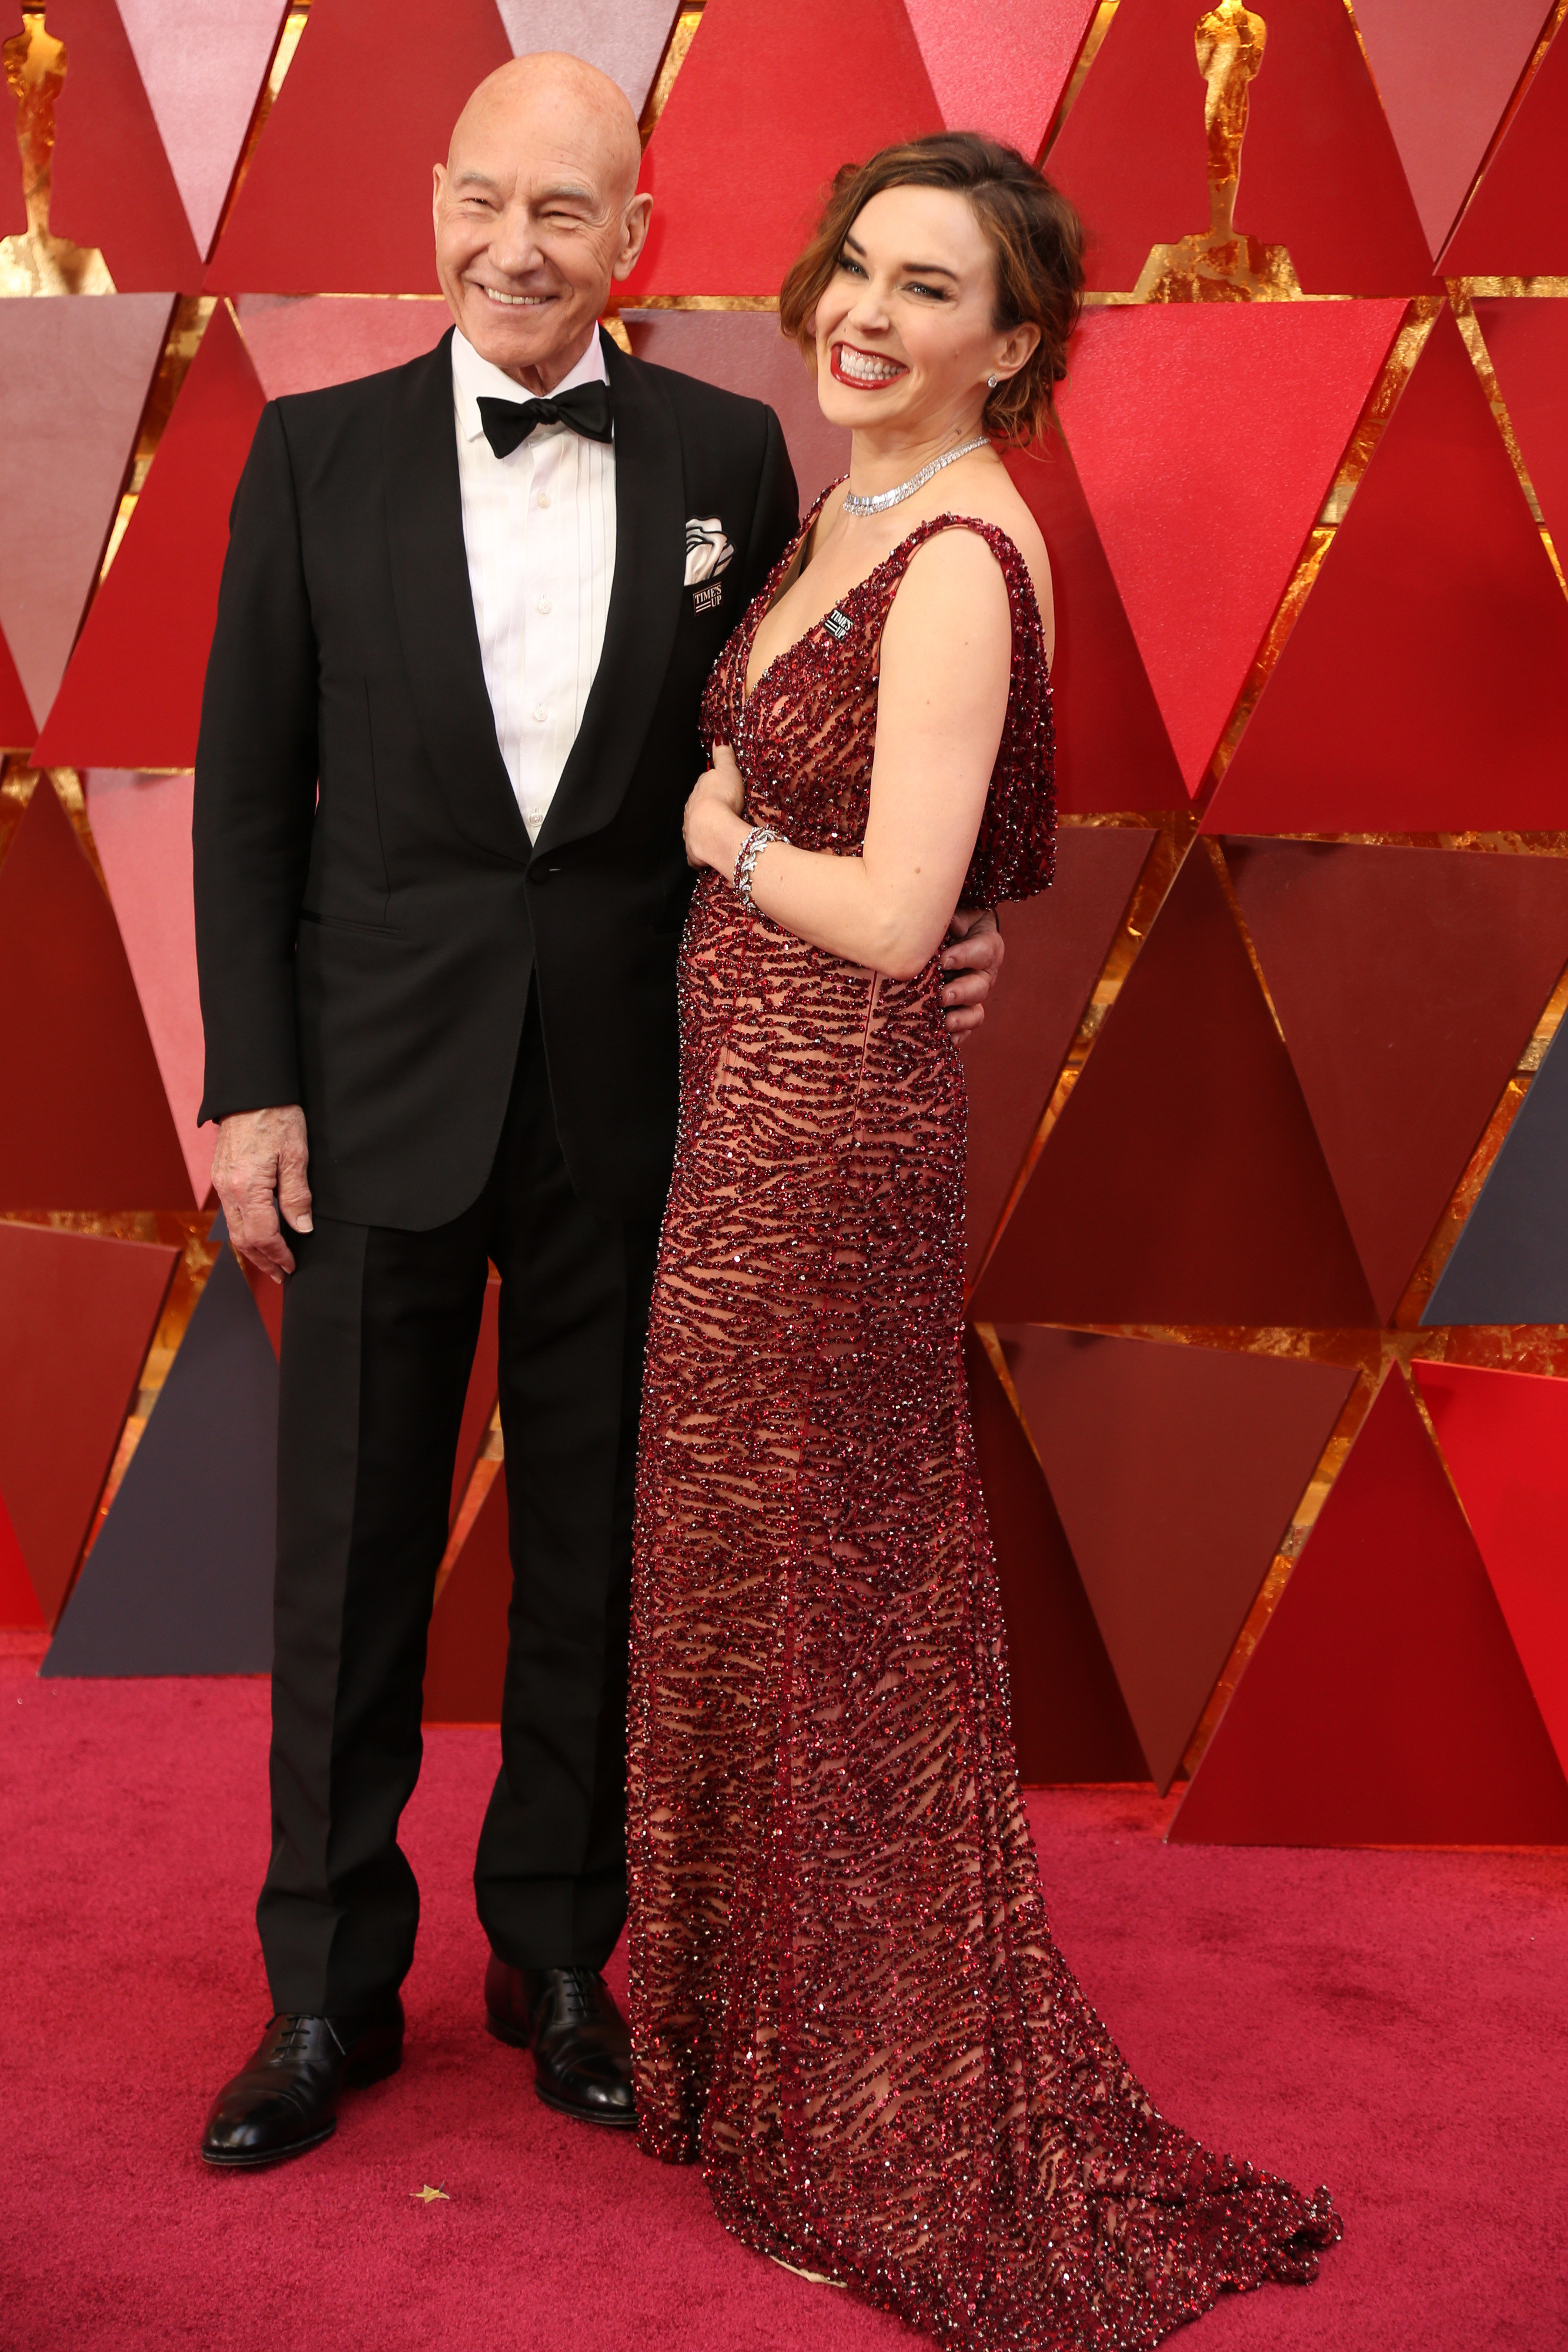 Patrick Stewart and Sunny Ozell on the red carpet in 2018